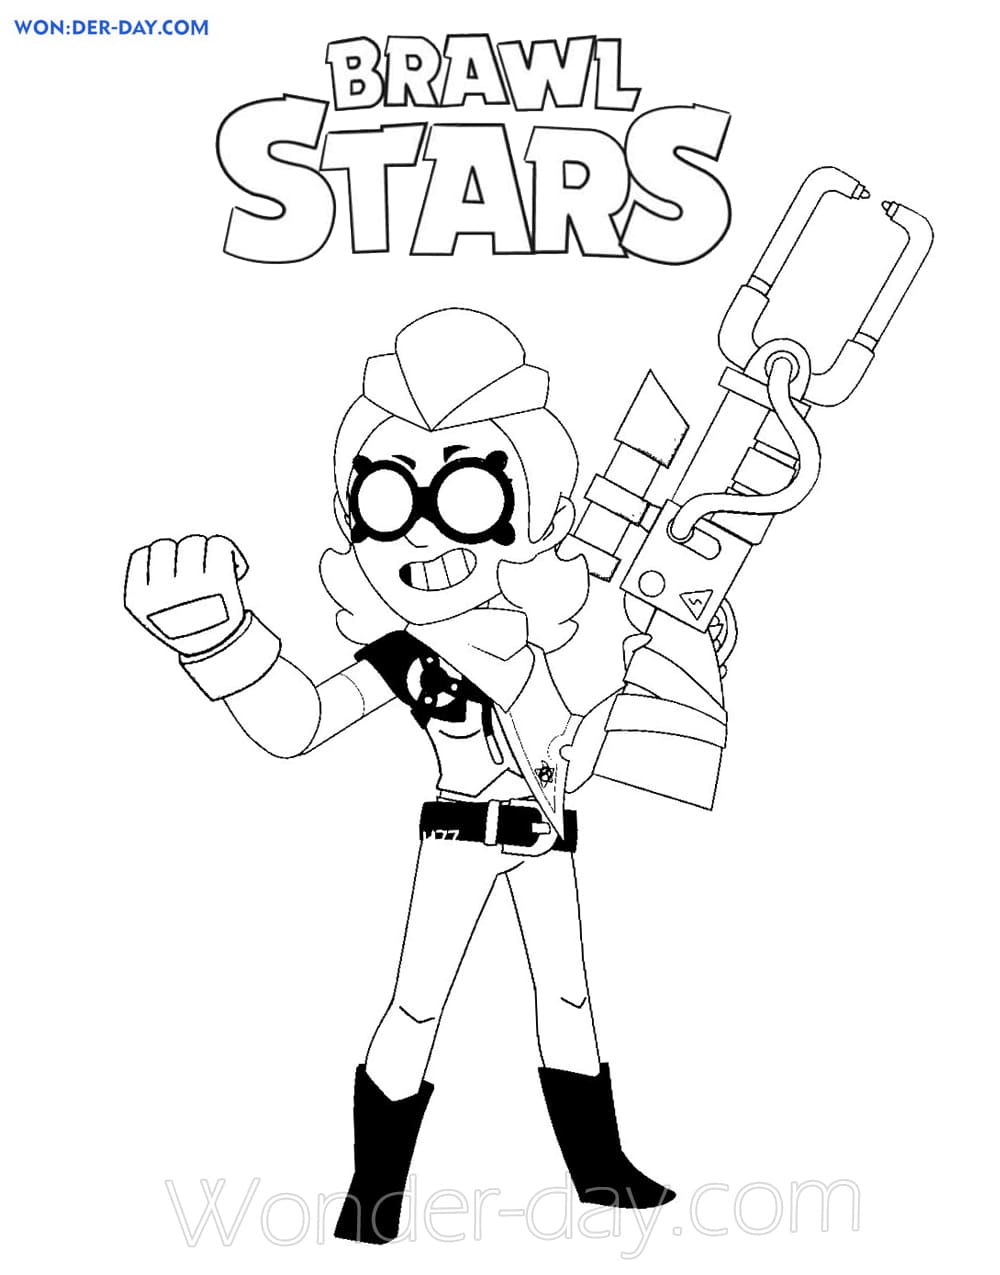 Belle Brawl Stars Coloring Pages Wonder Day Coloring Pages For Children And Adults - colorear dibujos de brawl stars belle